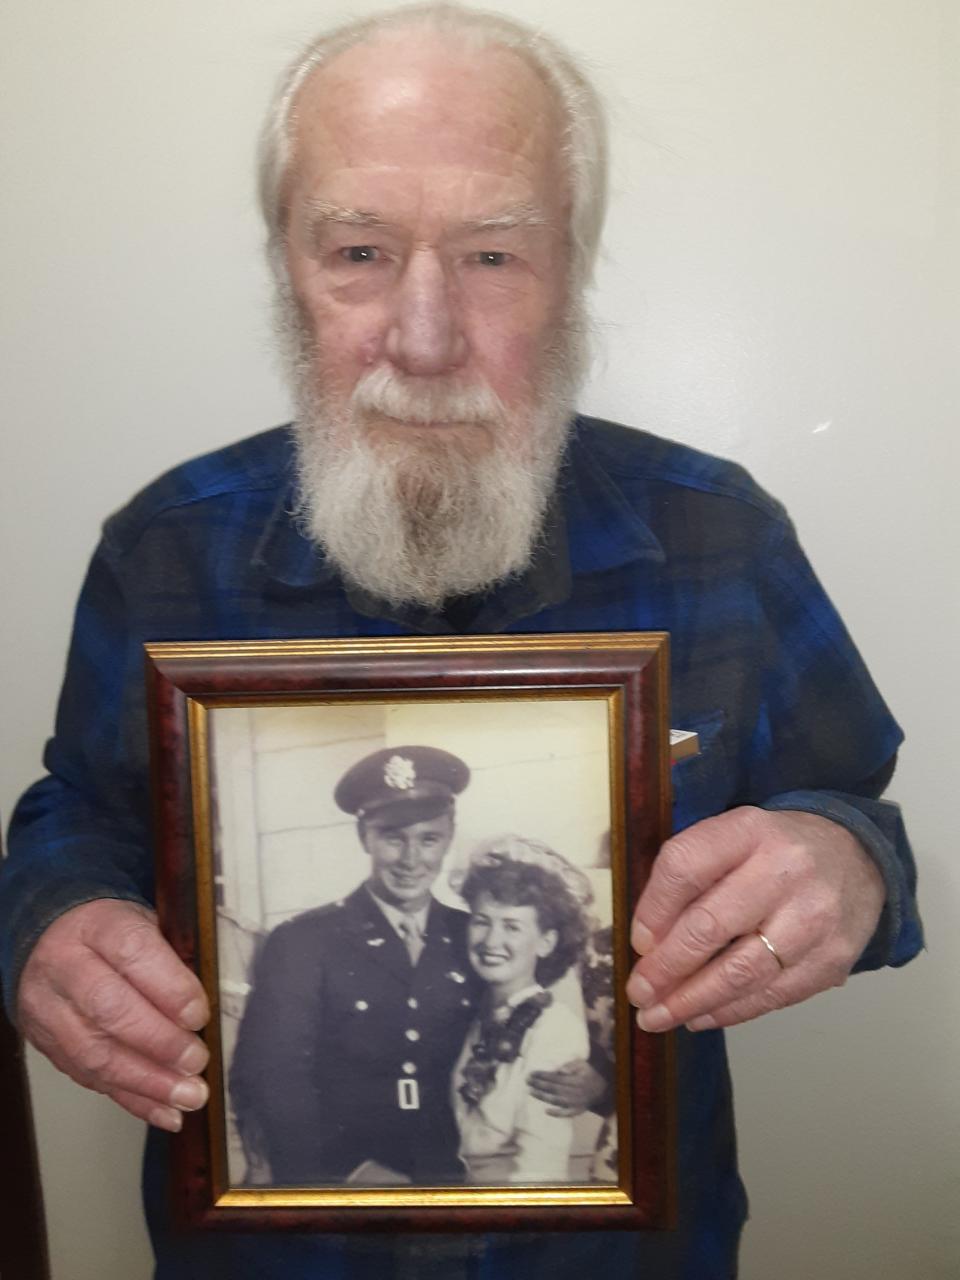 Minnesota resident George Campbell show the wedding photo of his parents, George and Lawanda Campbell, who died on the same day at age 96 in California after 75 years of marriage. Campbell overcame difficulties to obtain FEMA's funeral benefit for those who died of COVID-19.